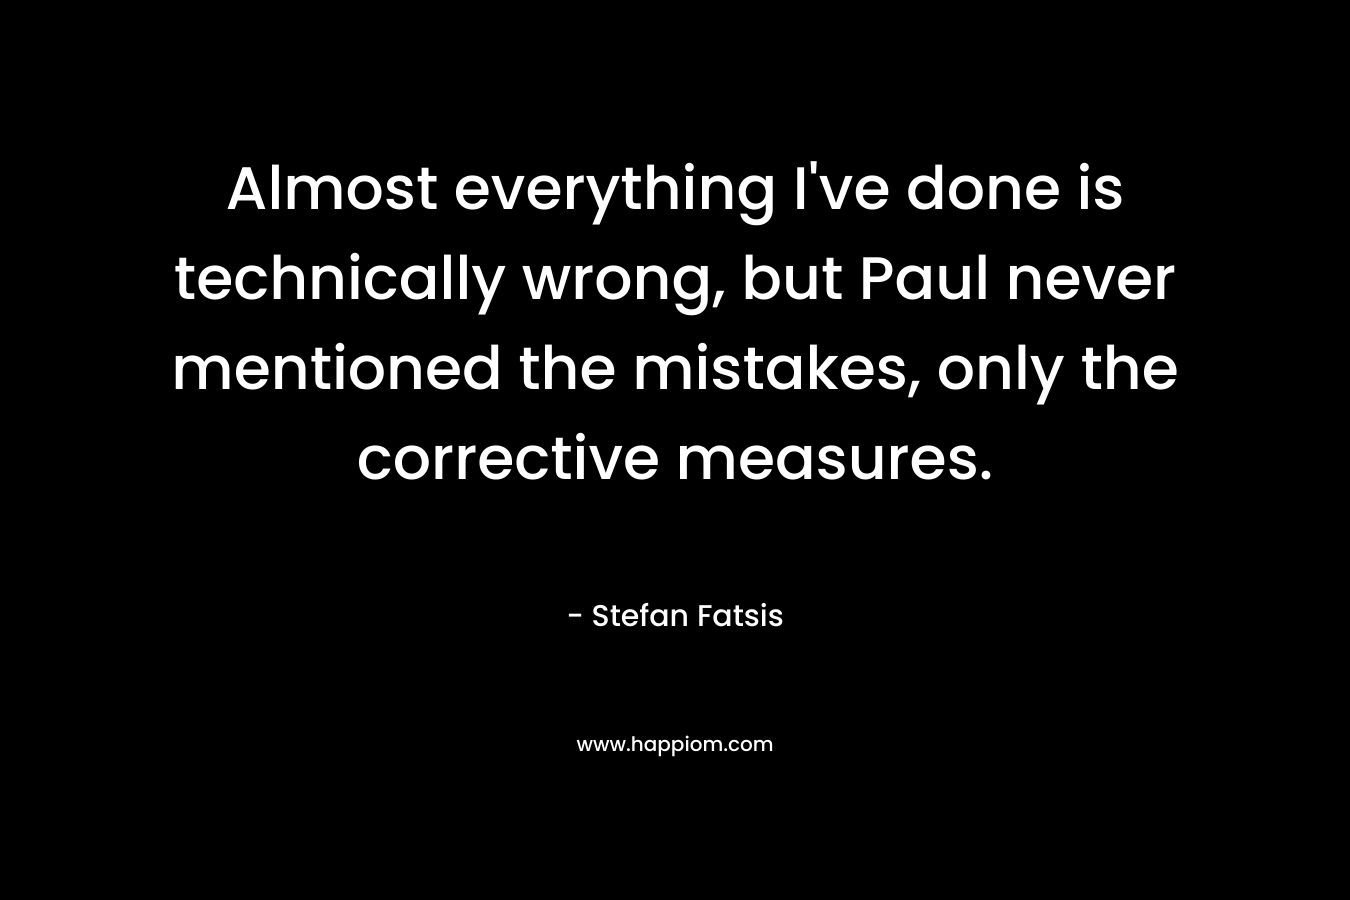 Almost everything I've done is technically wrong, but Paul never mentioned the mistakes, only the corrective measures.